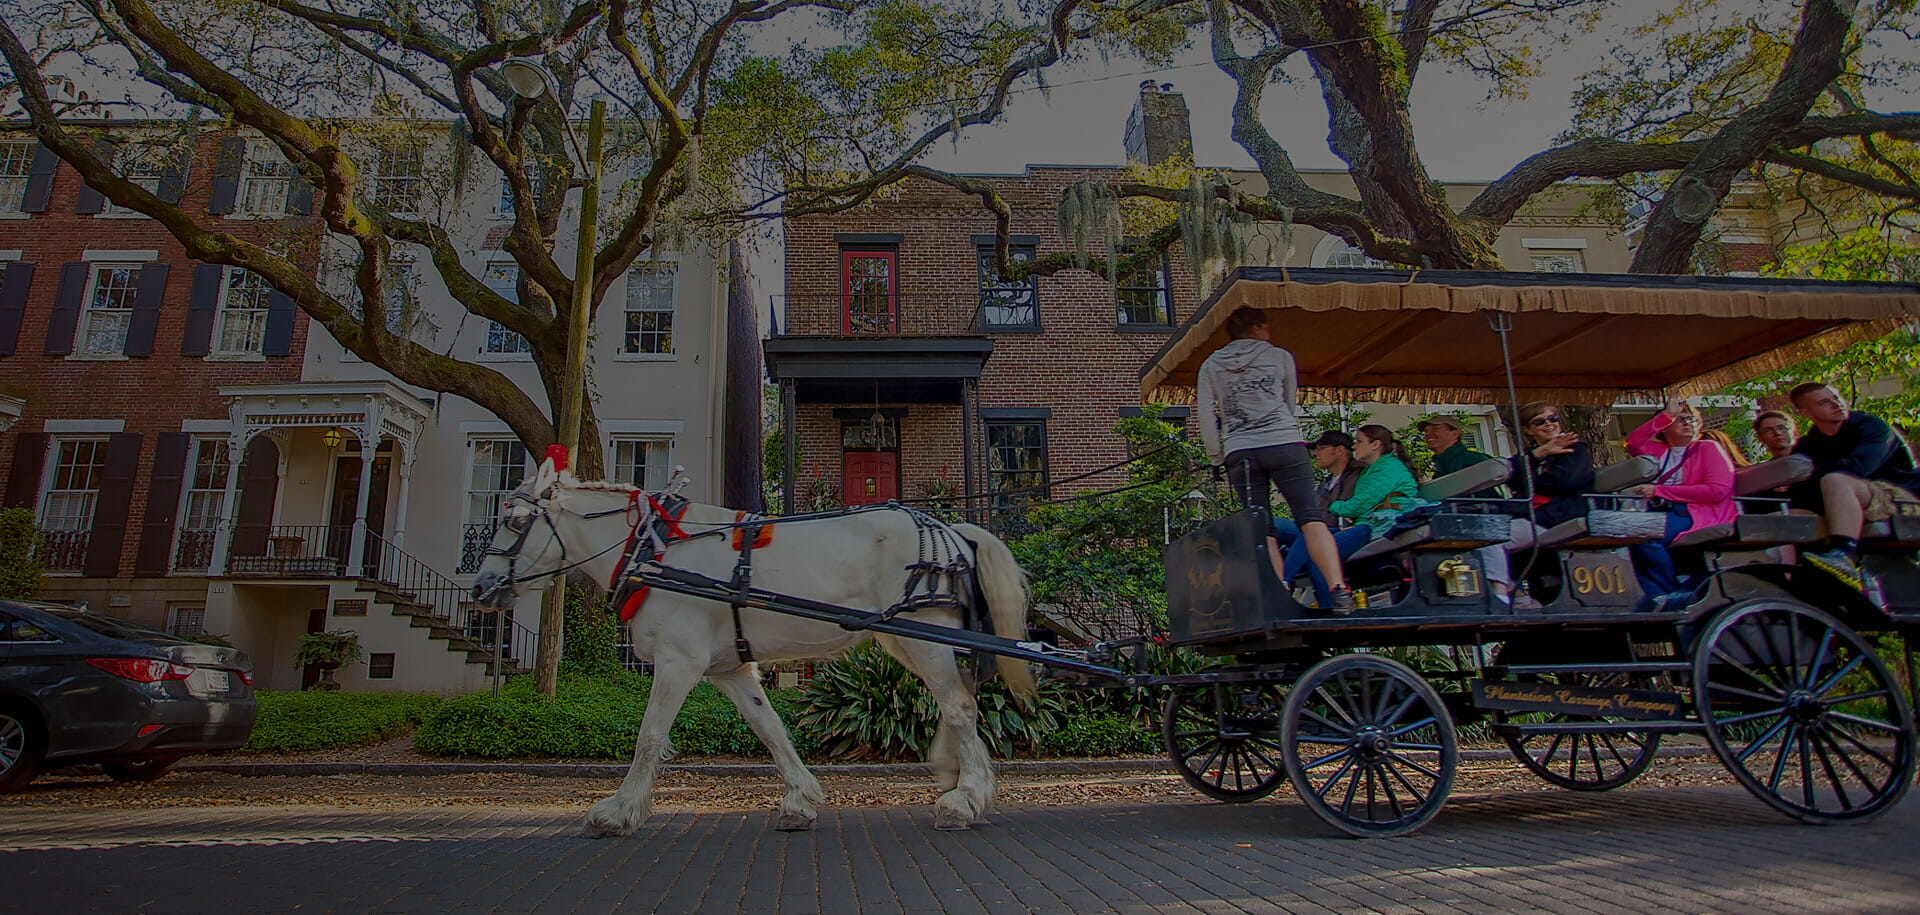 Things To Do in Savannah GA | Attractions & Tours | Stay in Savannah